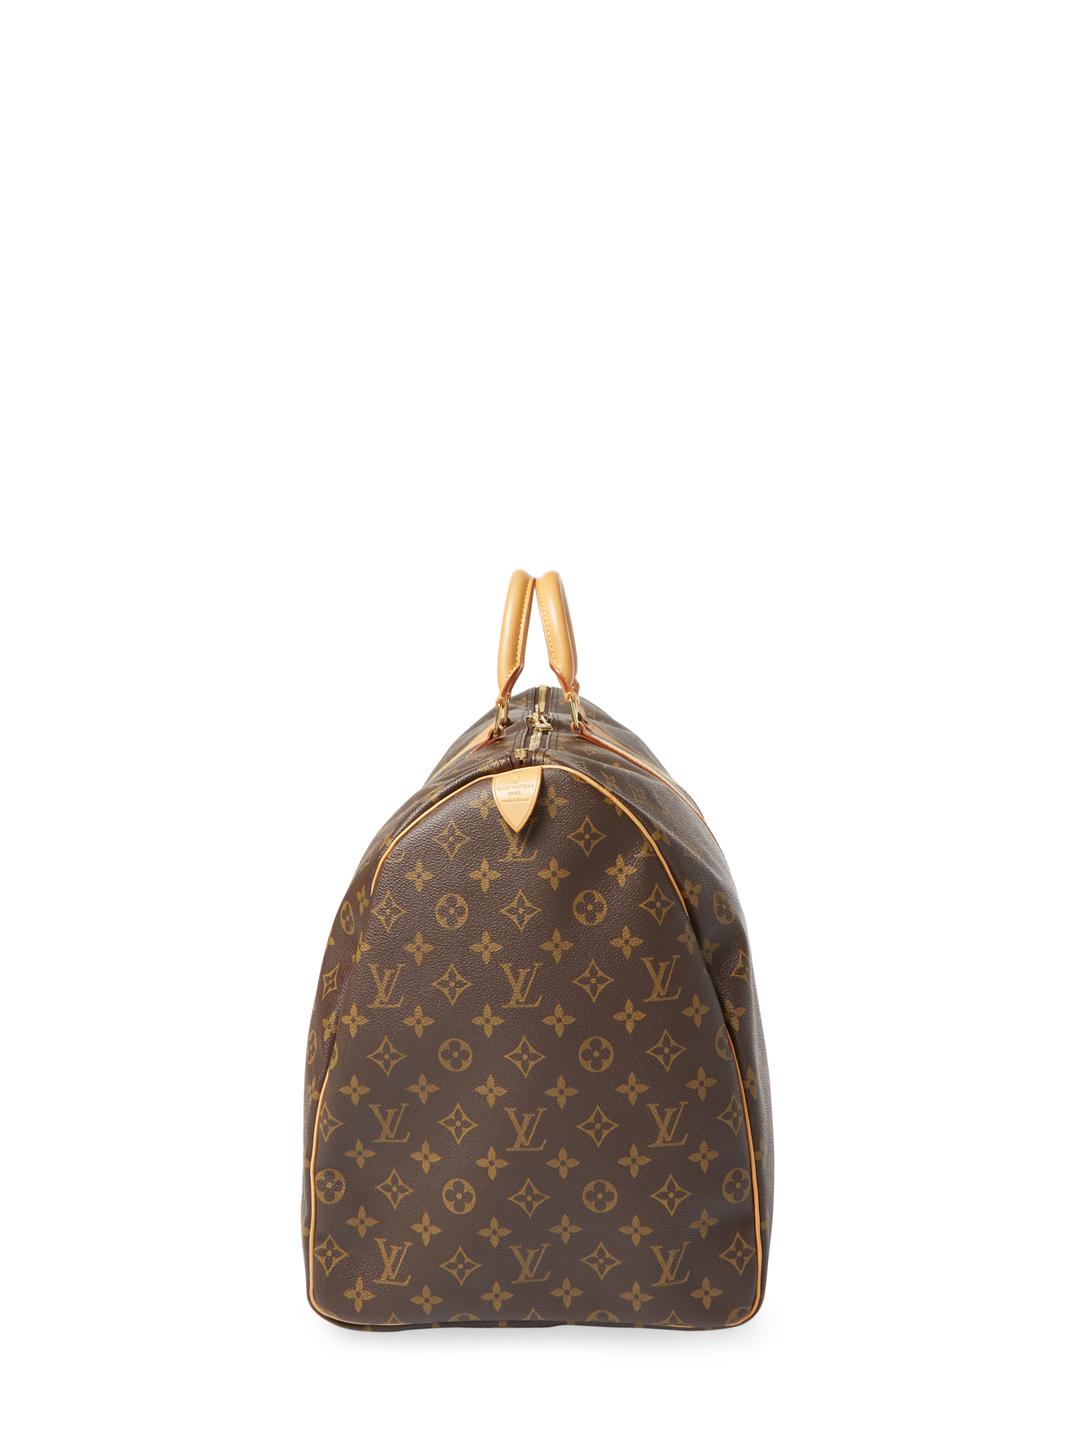 Louis Vuitton Vintage Leather Keepall 55 Bandouliere Monogram Canvas Duffel Travel Bag in Brown ...